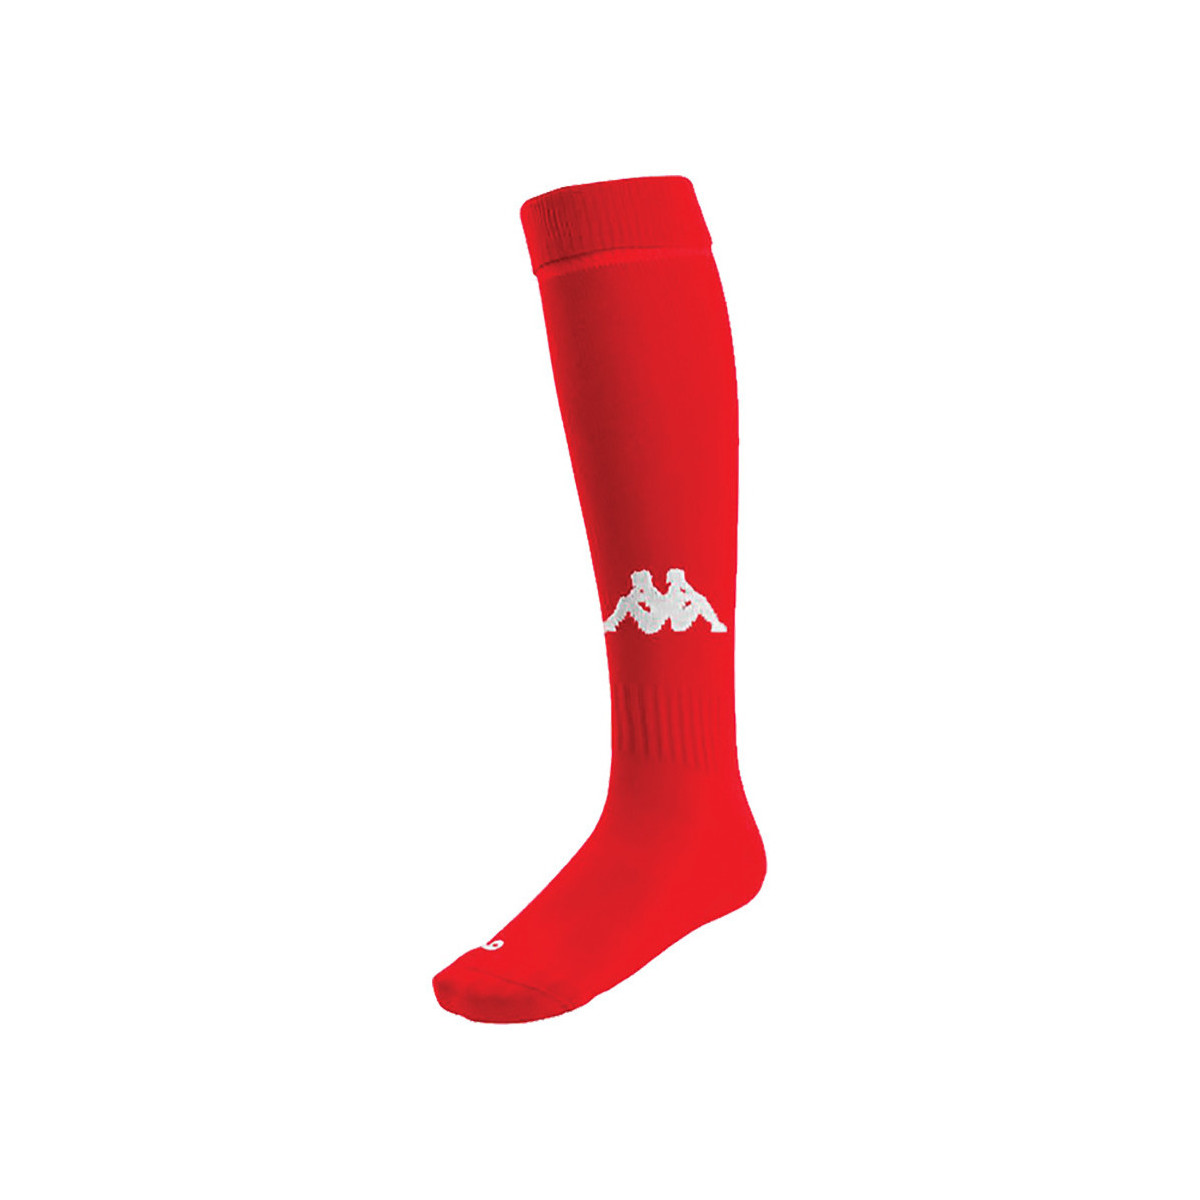 Kappa Rouge Chaussettes Penao (3 paires) Xx88d99V